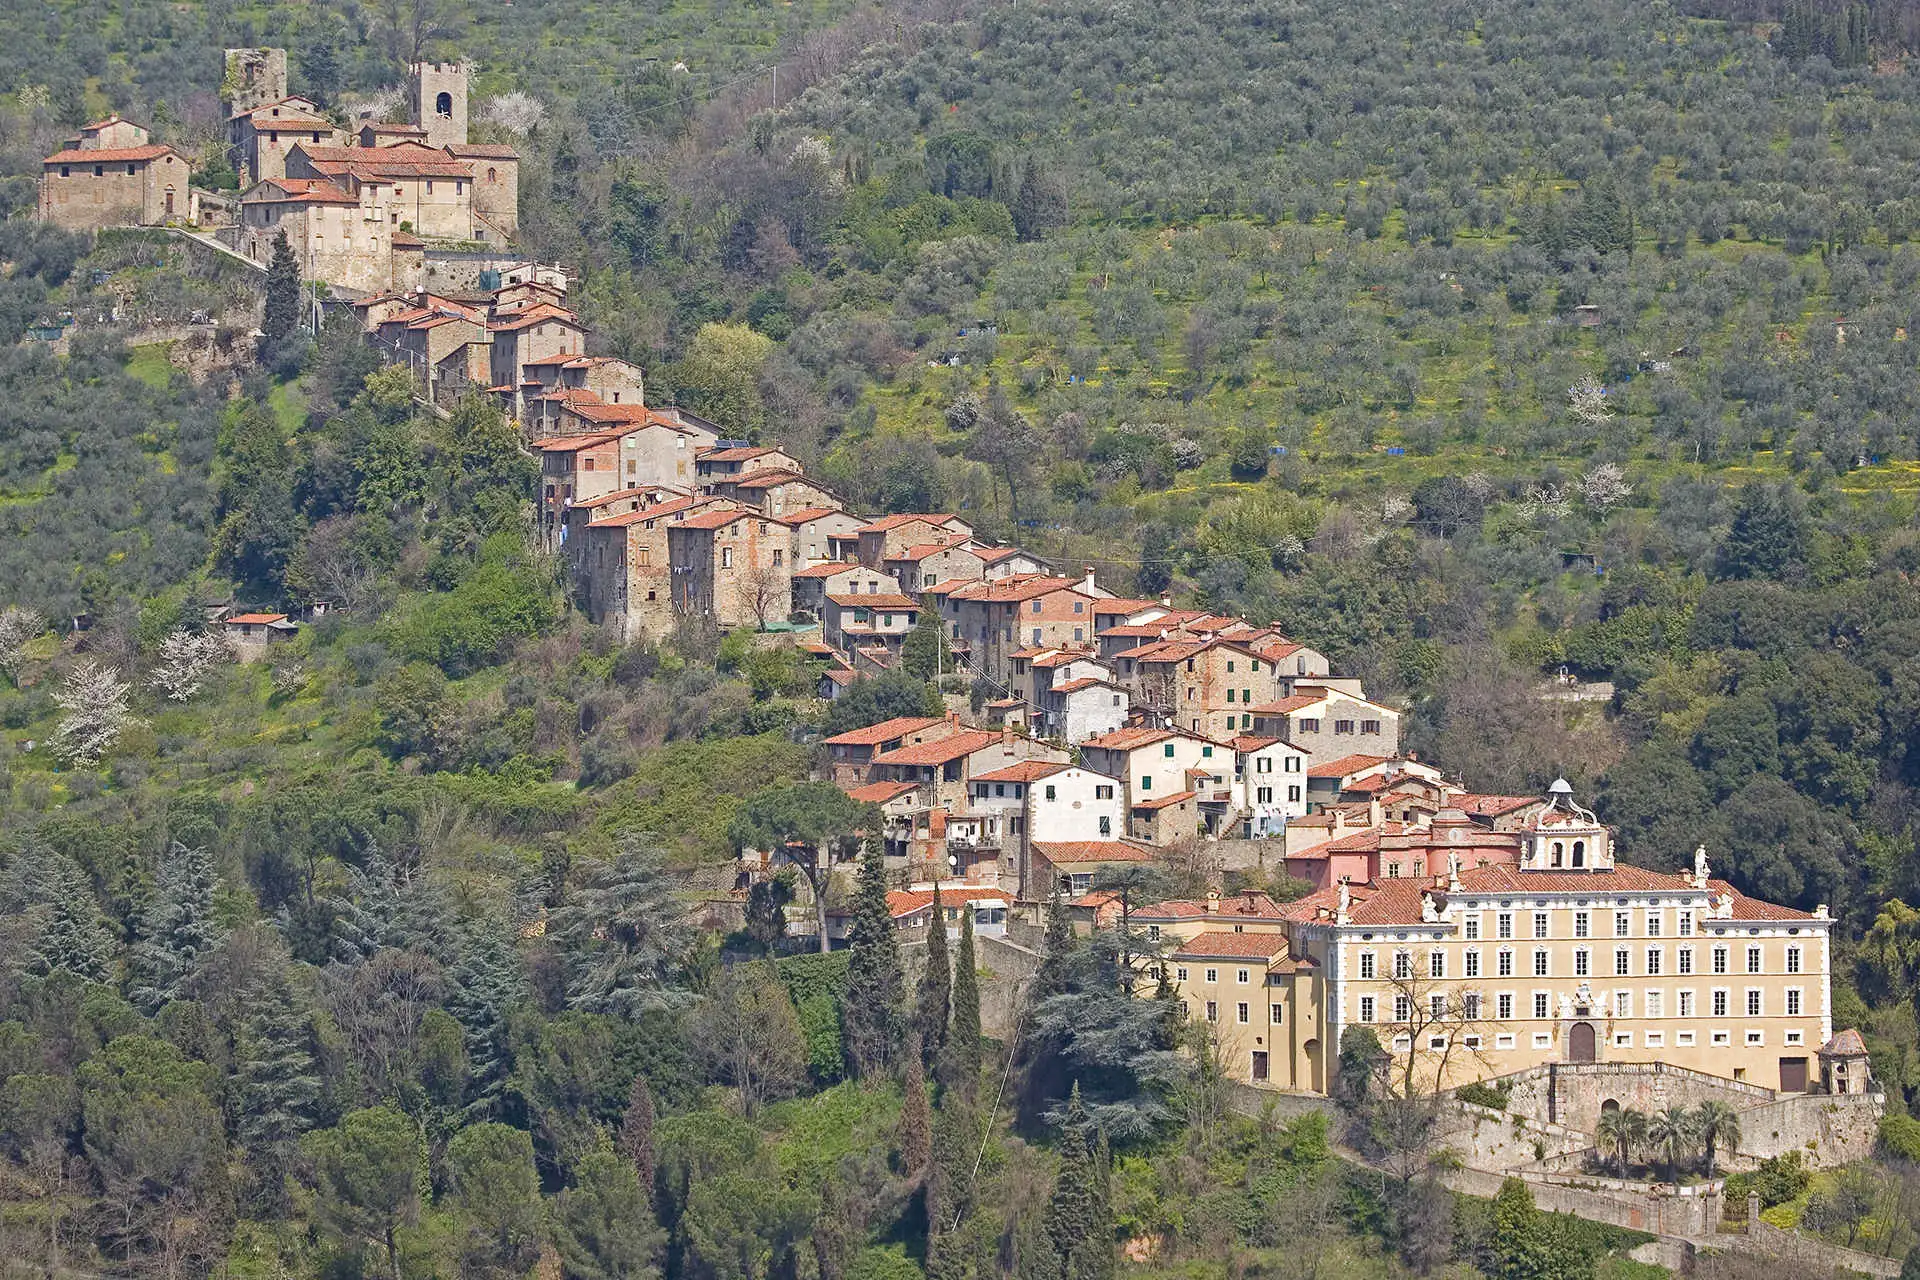 View of Collidi, Italy; Courtesy of Eder/Shutterstock.com